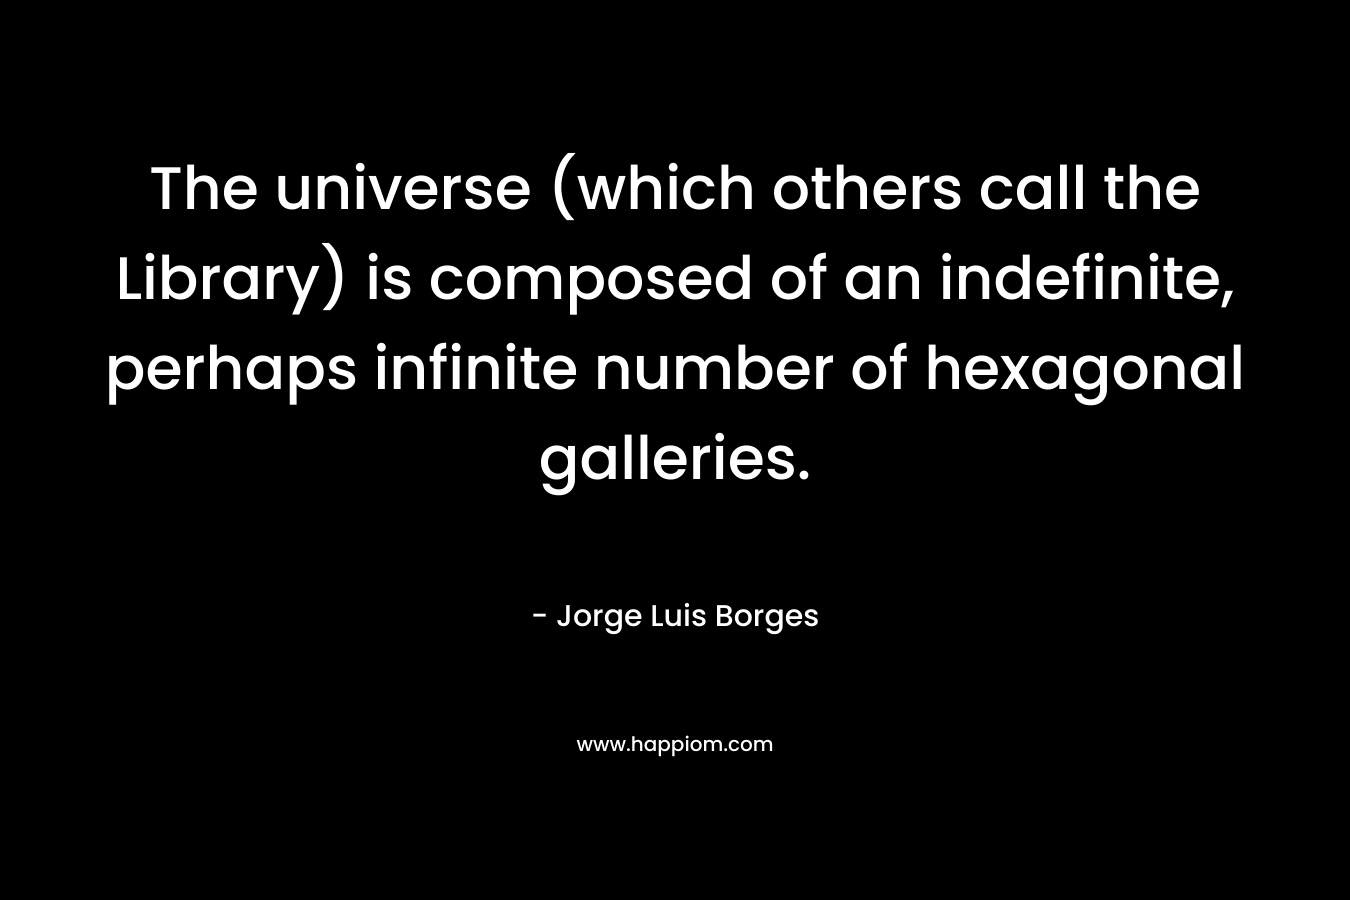 The universe (which others call the Library) is composed of an indefinite, perhaps infinite number of hexagonal galleries.